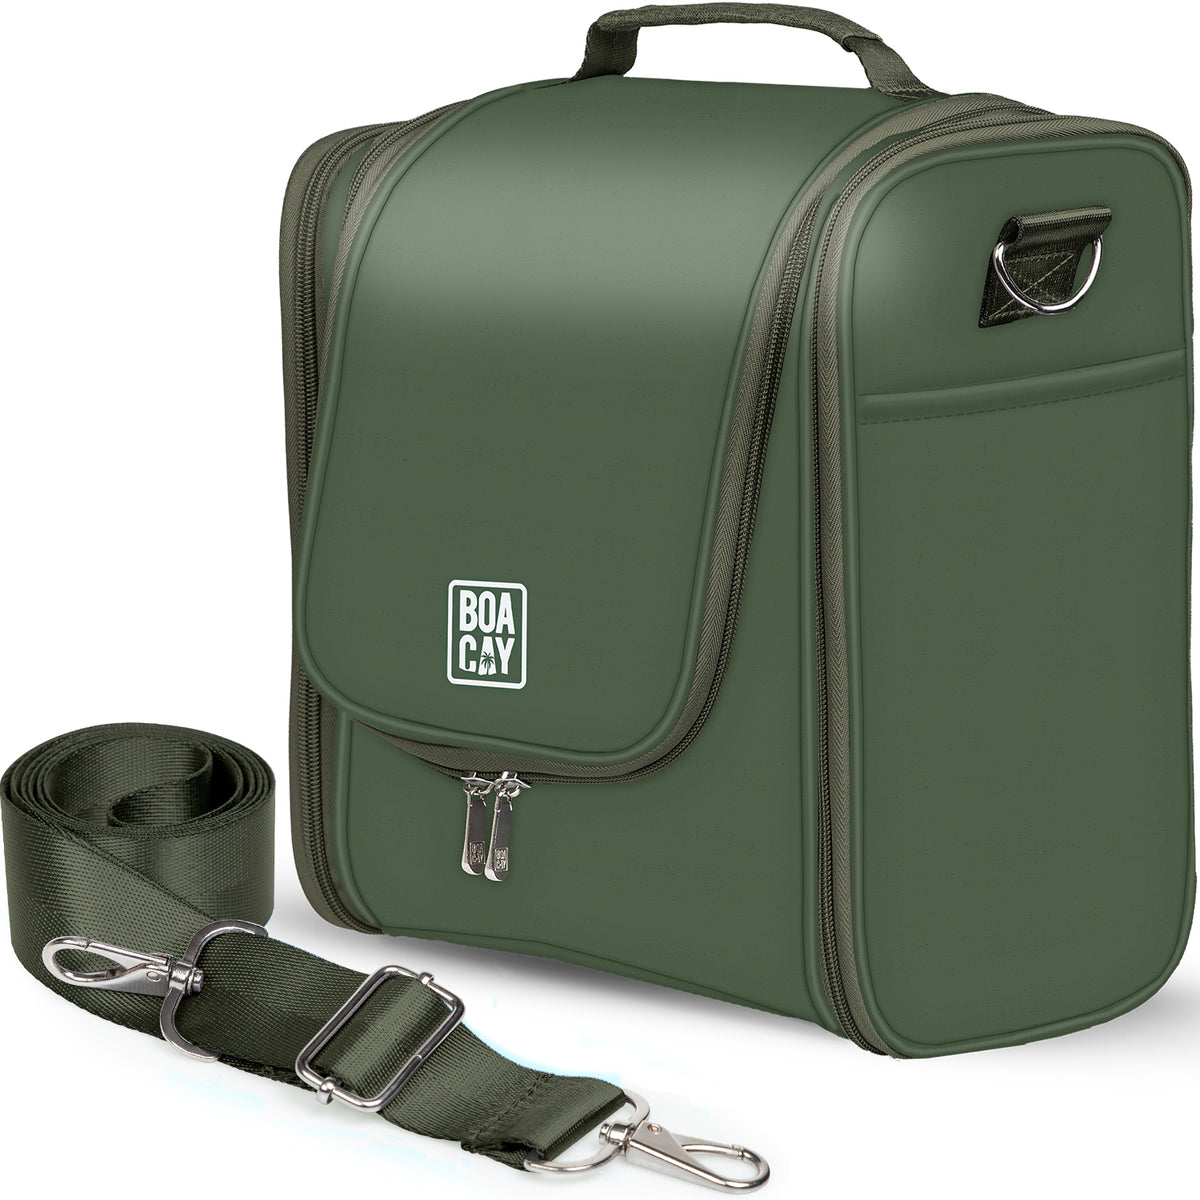 Extra-Large Collapsible Hanging Toiletry Bag - Olive Green